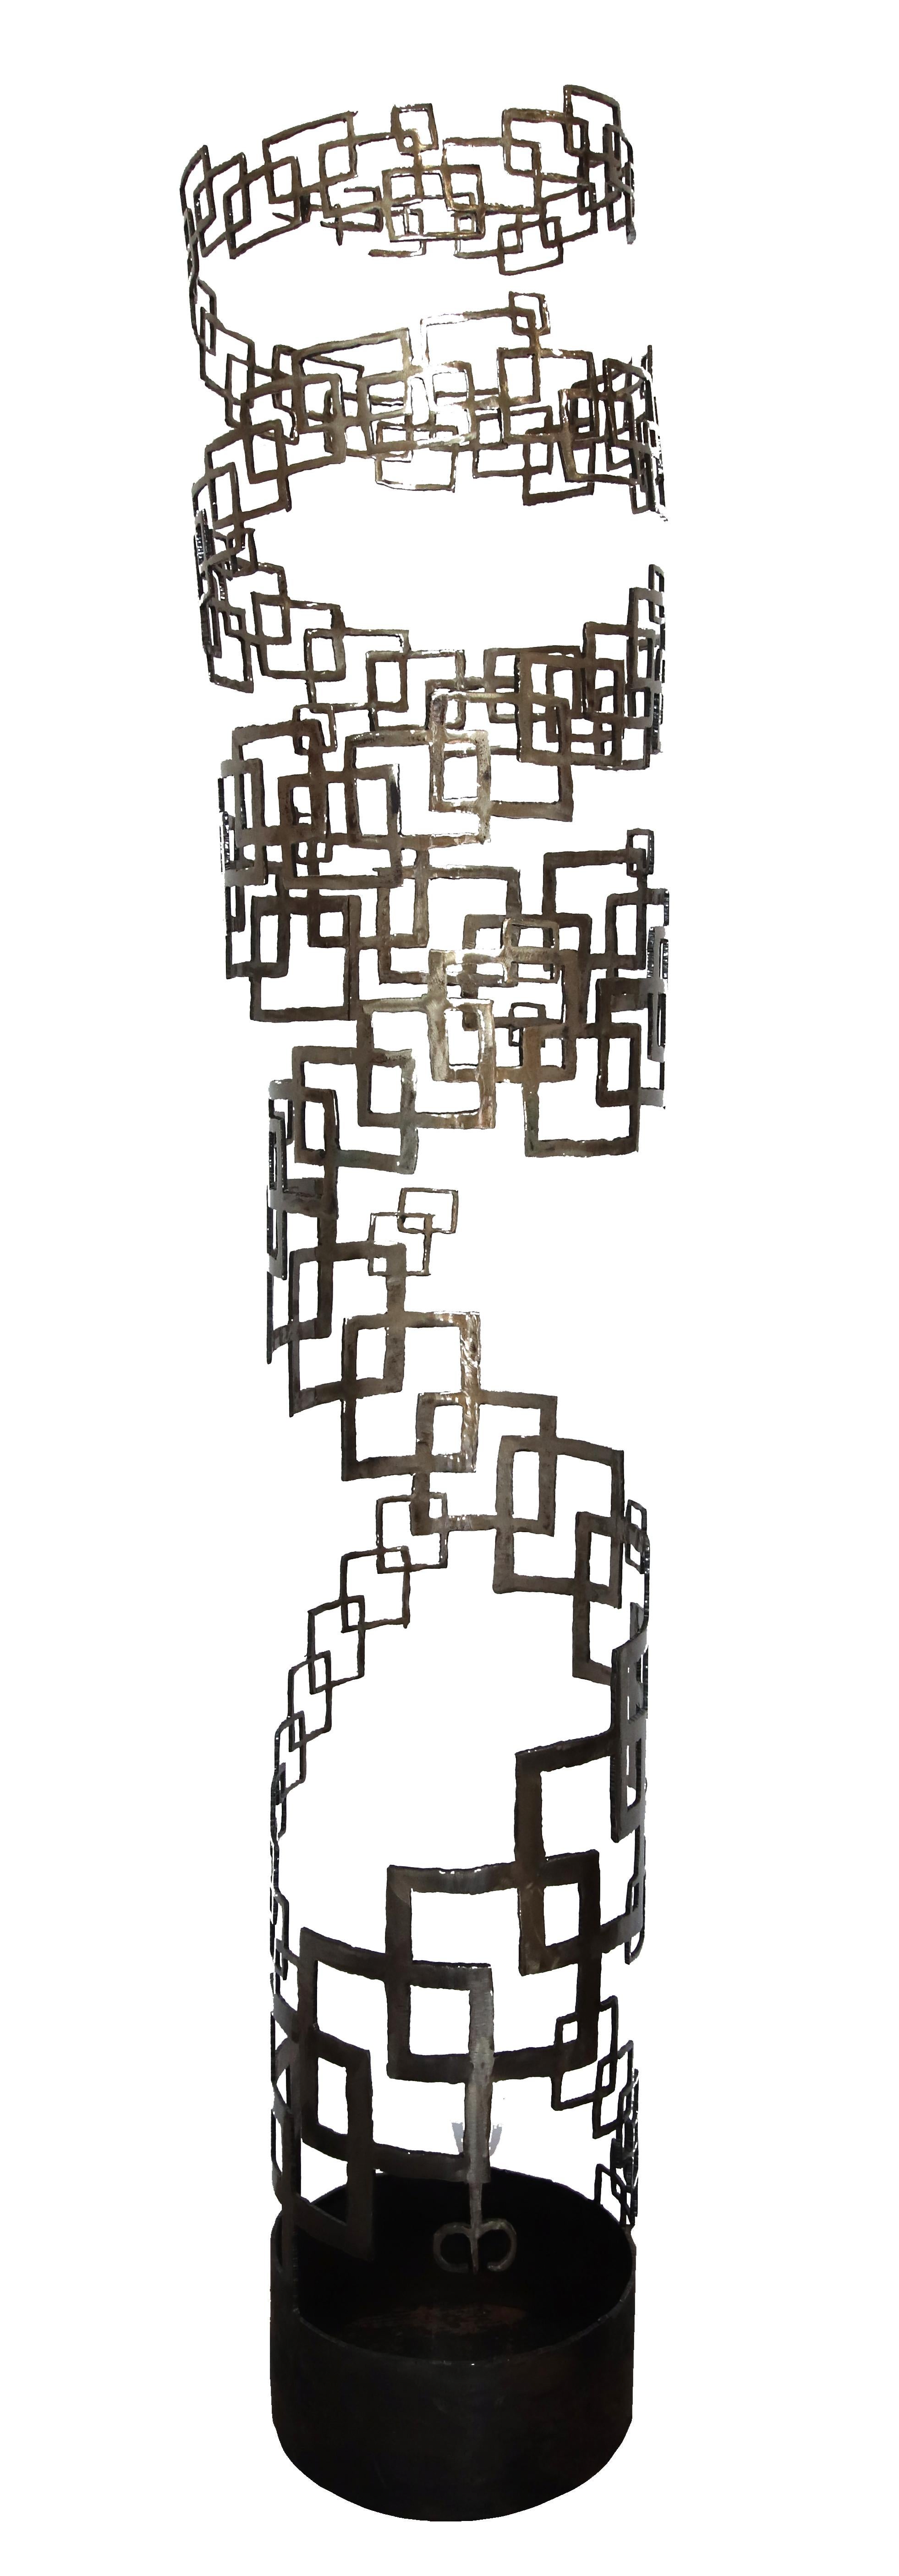 D'Arcy Bellamy Abstract Sculpture - Square To The Second Power - Large Original Abstract Steel Sculpture